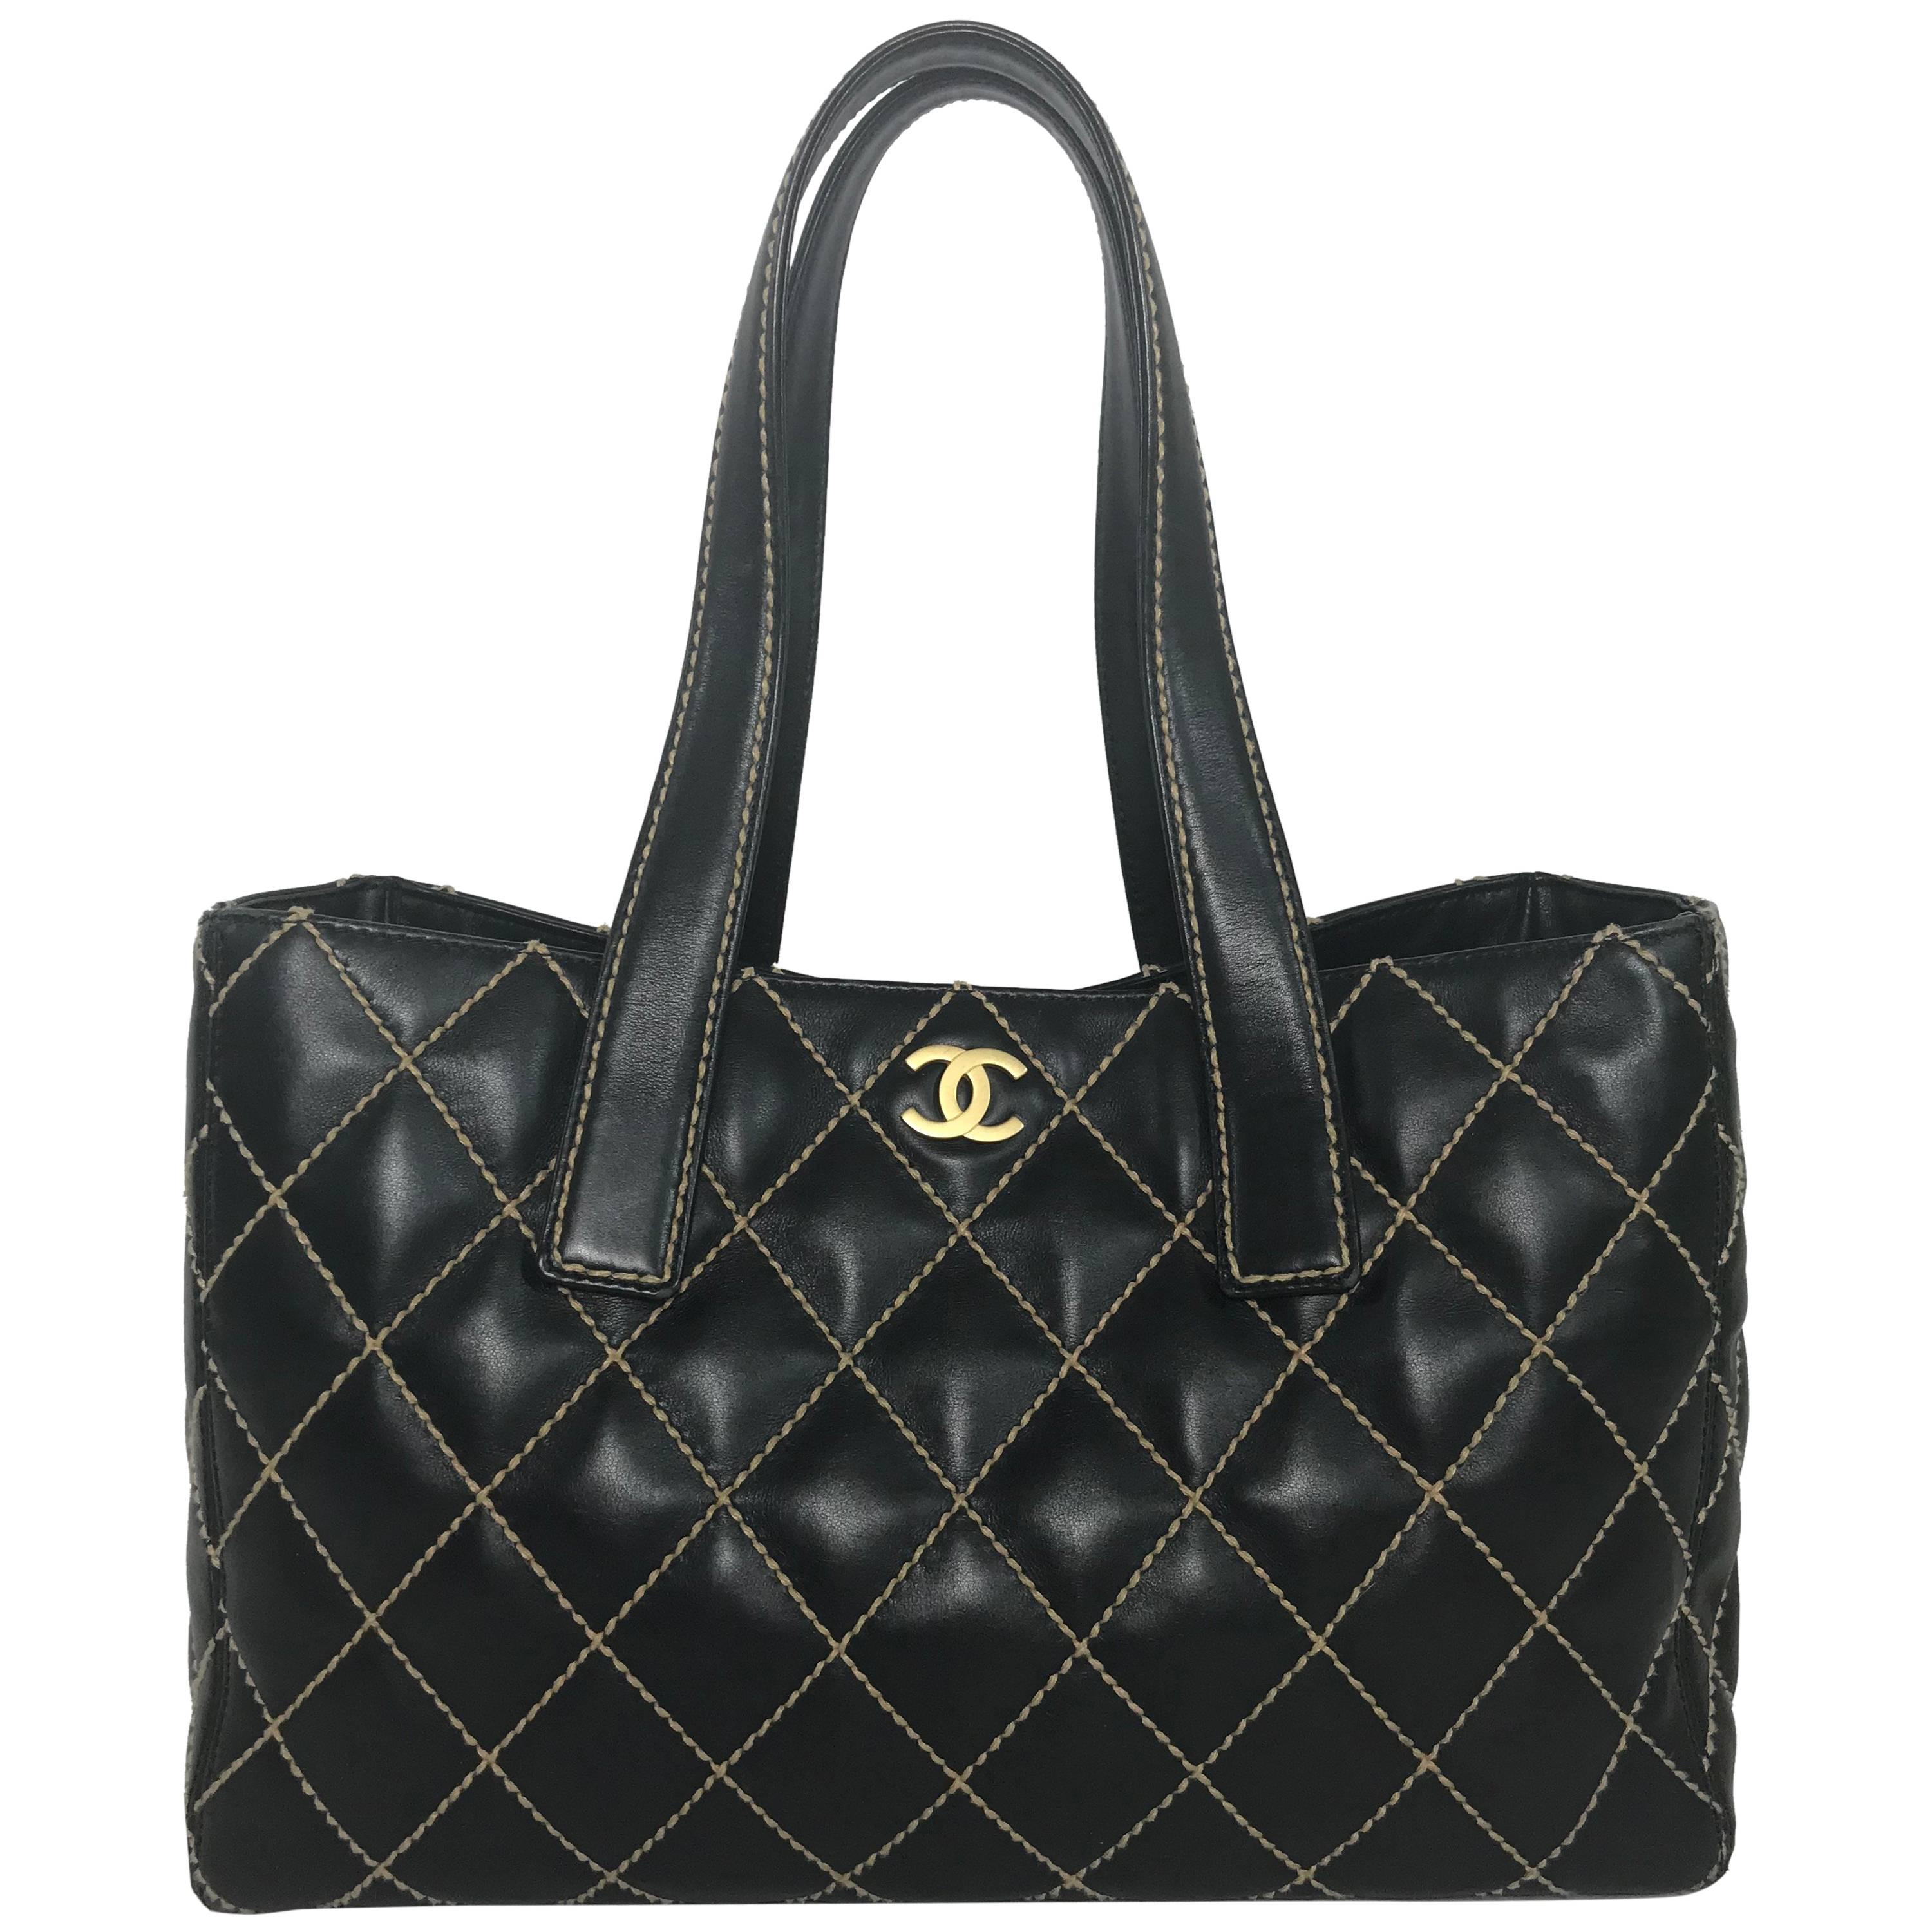 Chanel Quilted Leather Wild Stitch Tote in Black Tote Bag